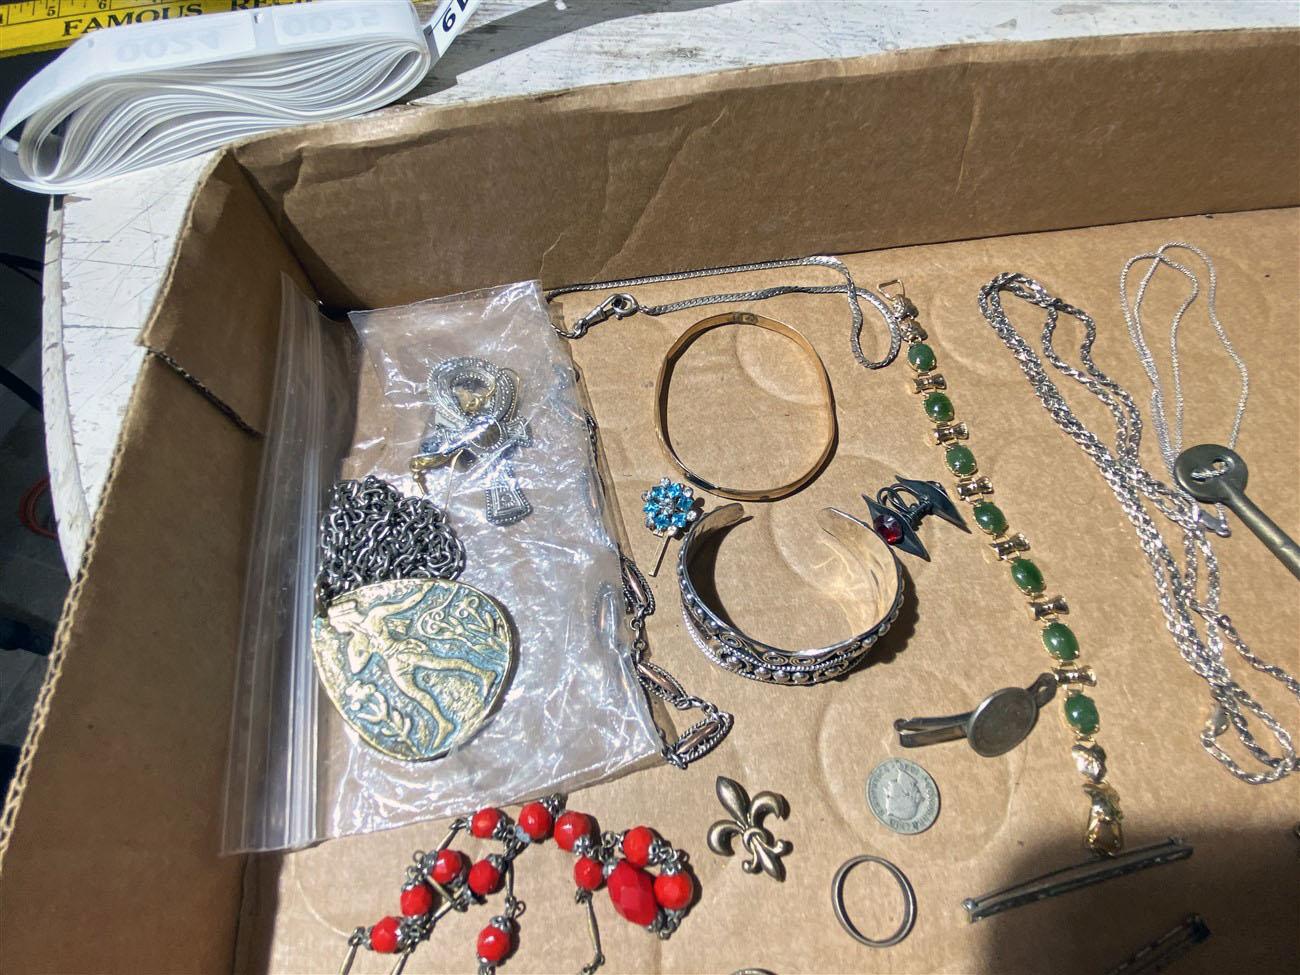 Lot of vintage jewelry including many pieces of sterling silver